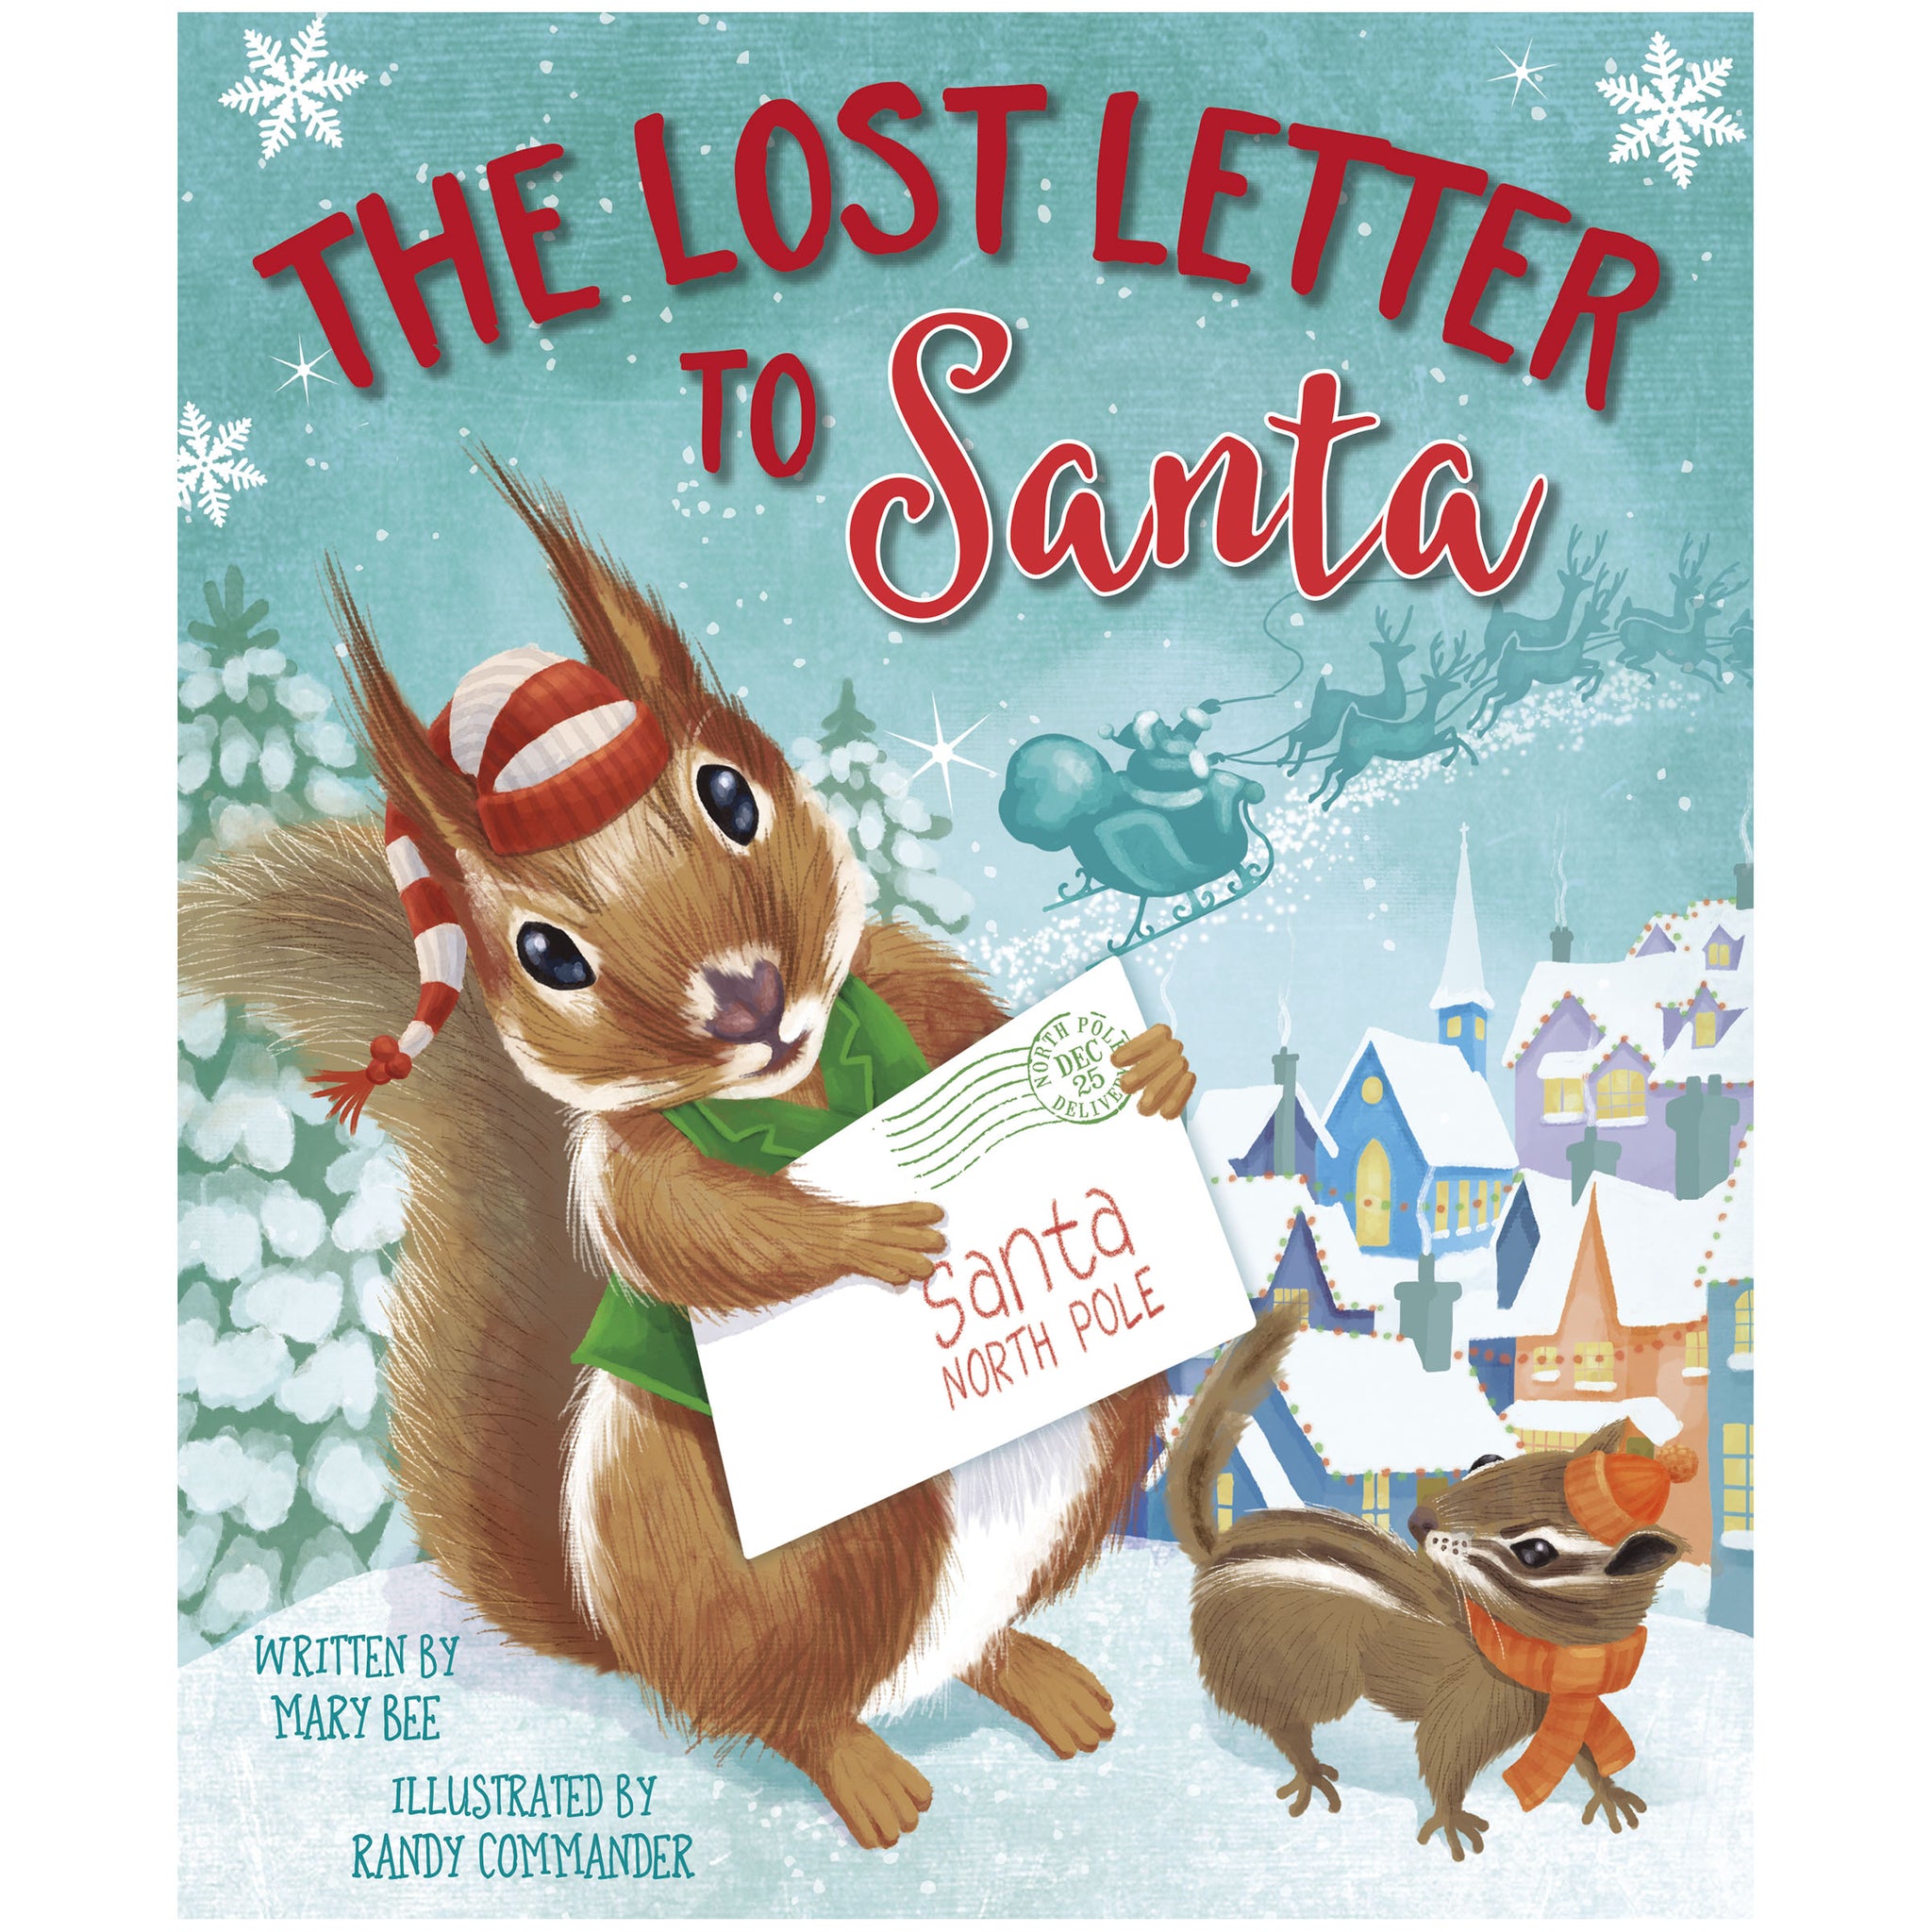 "The Lost Letter to Santa" Children's Christmas Story Book